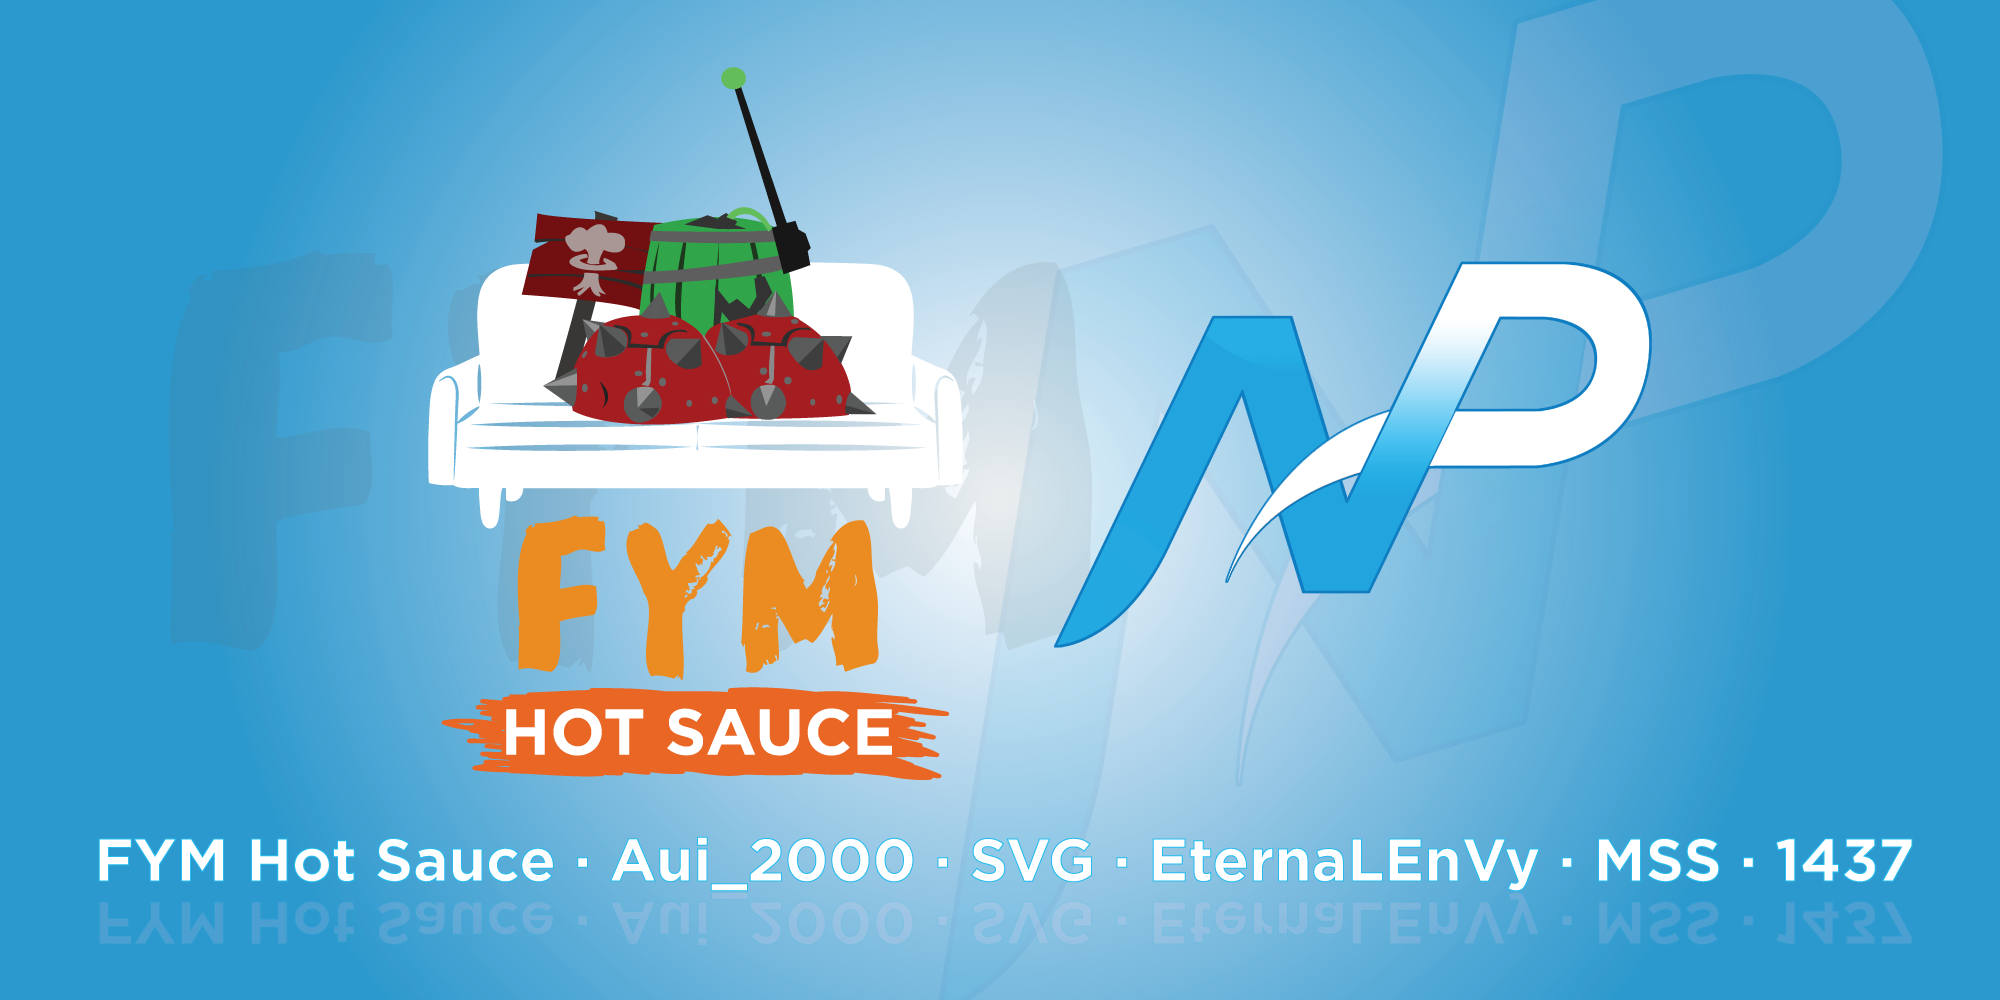 FYM Hot Sauce and Team NP (Photo: FYM Hot Sauce)